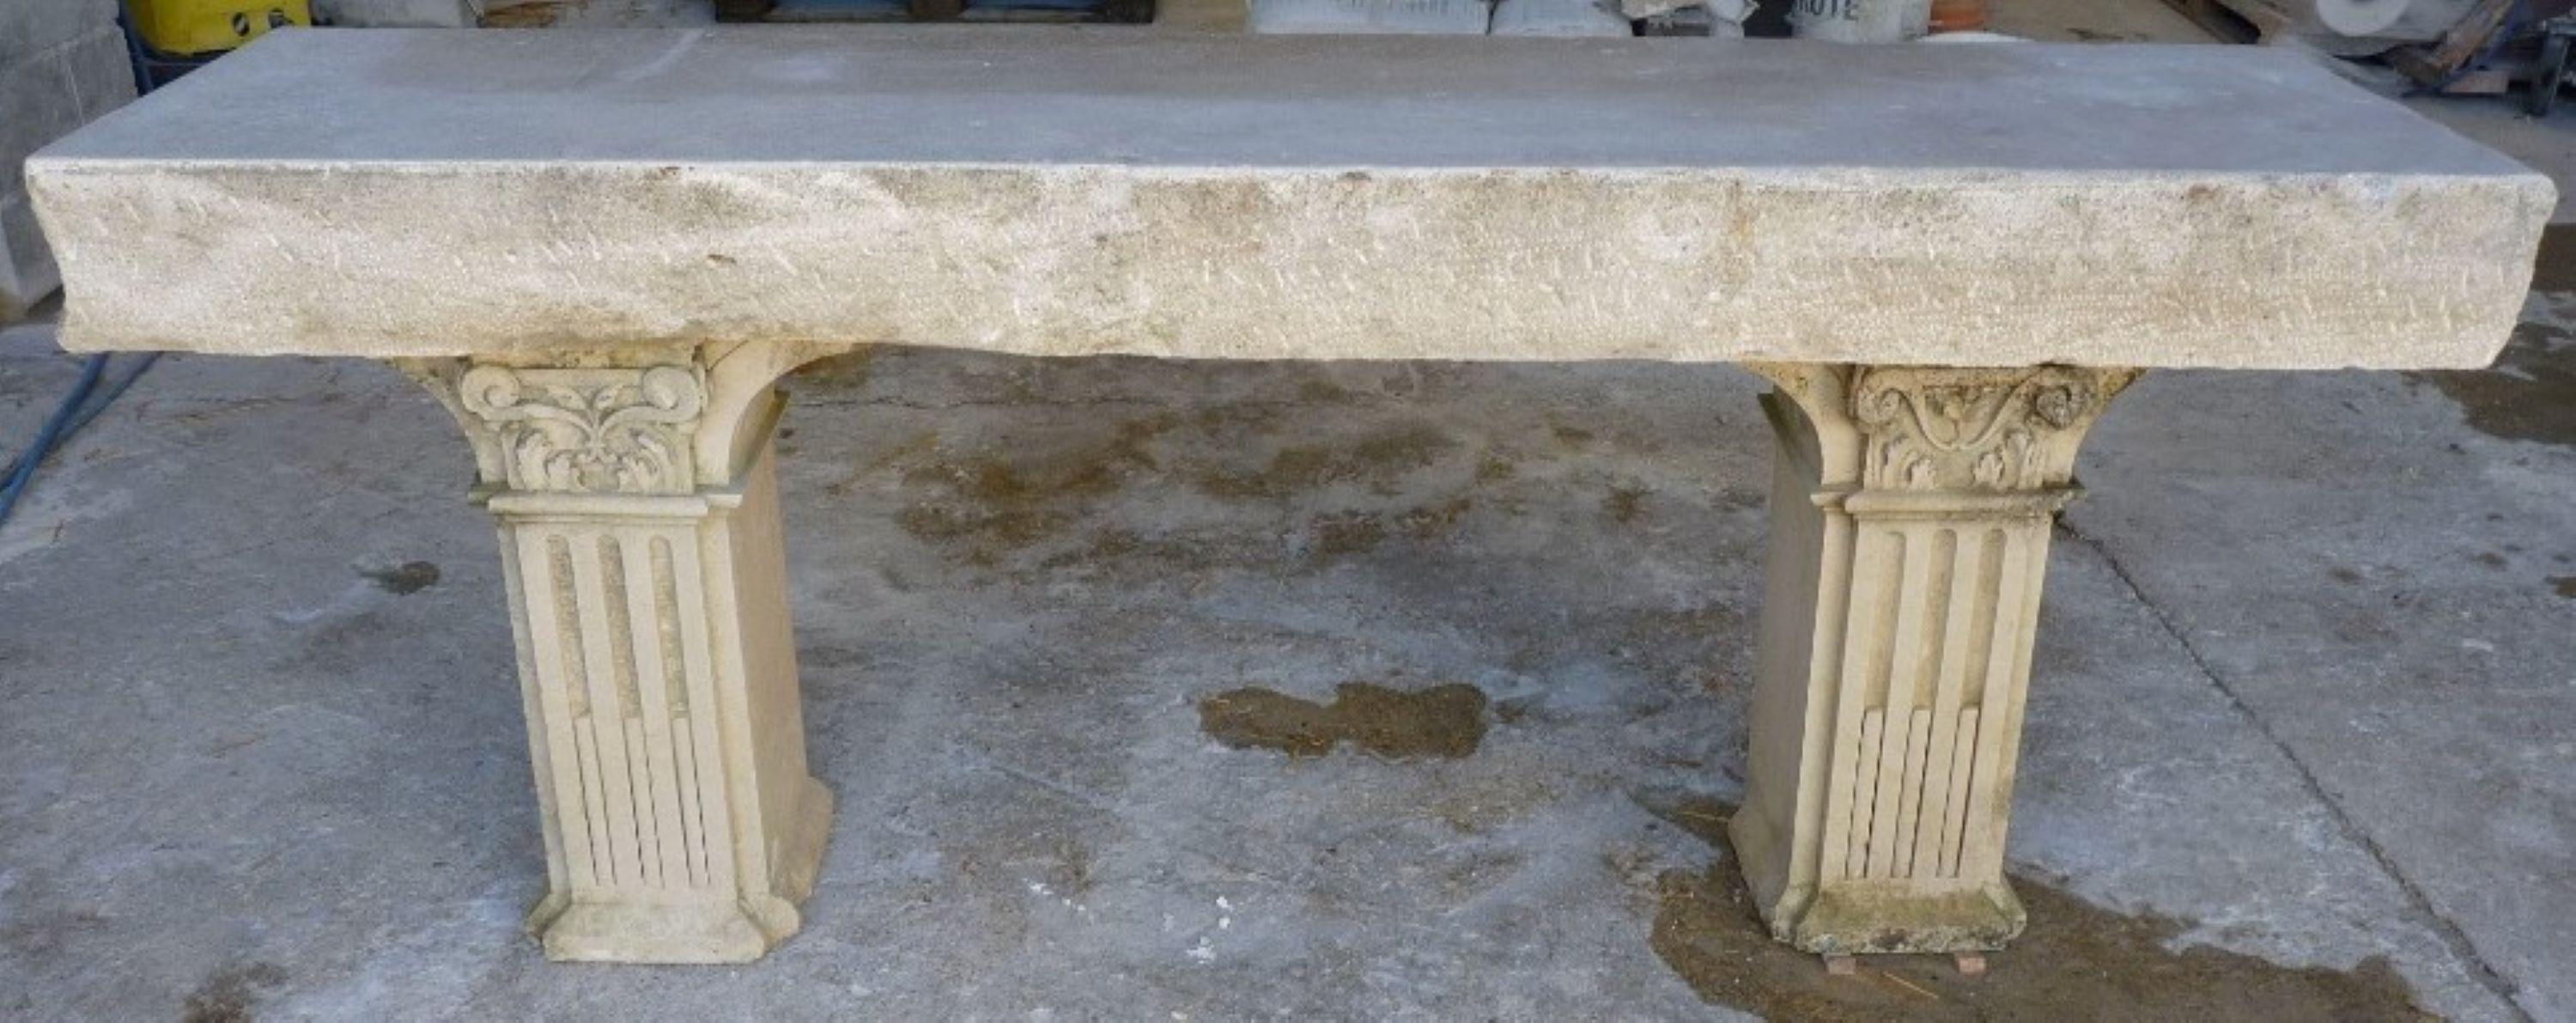 18th-19th century carved stone antique Console garden refreshments outdoor indoor table. It will be the perfect touch by an outdoor fireplace, whether decorated with a jardiniere or an anduze , or simply used as a patisserie and to hold food for